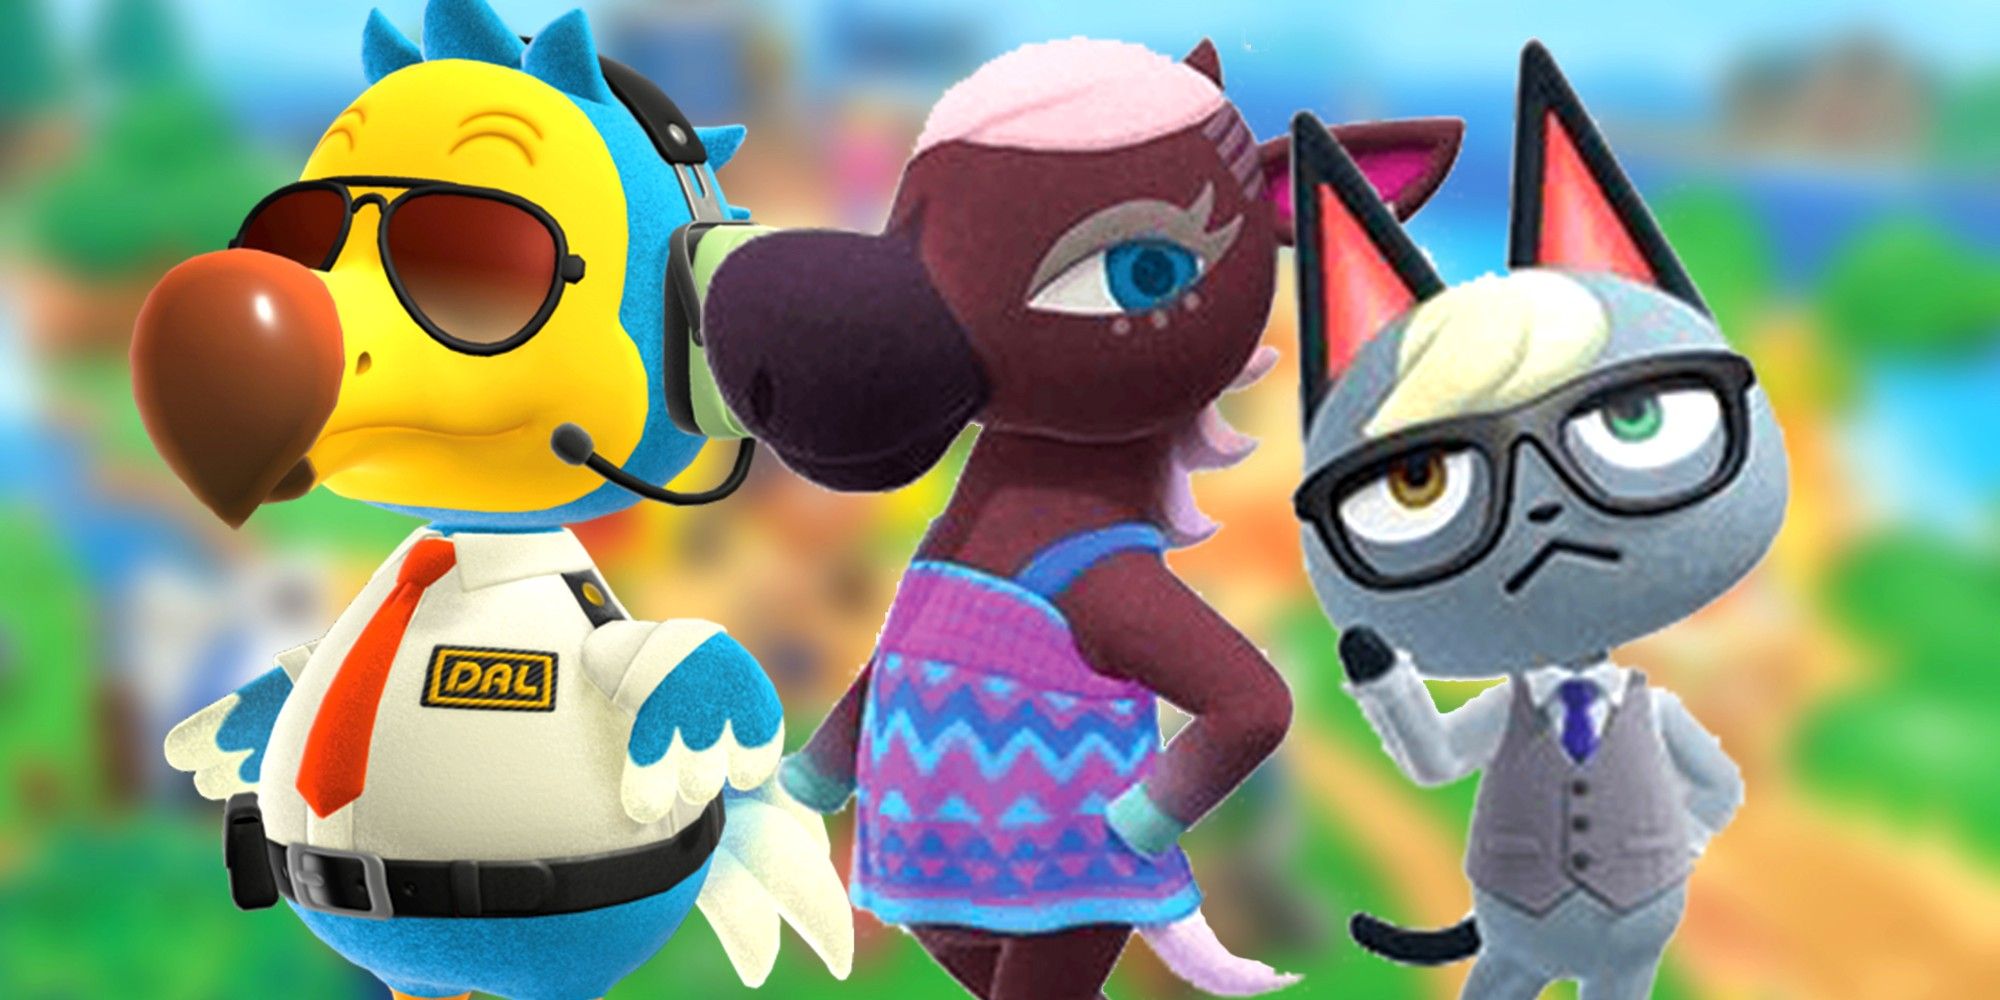 Three Animal Crossing: New Horizons Villagers representing different personality types